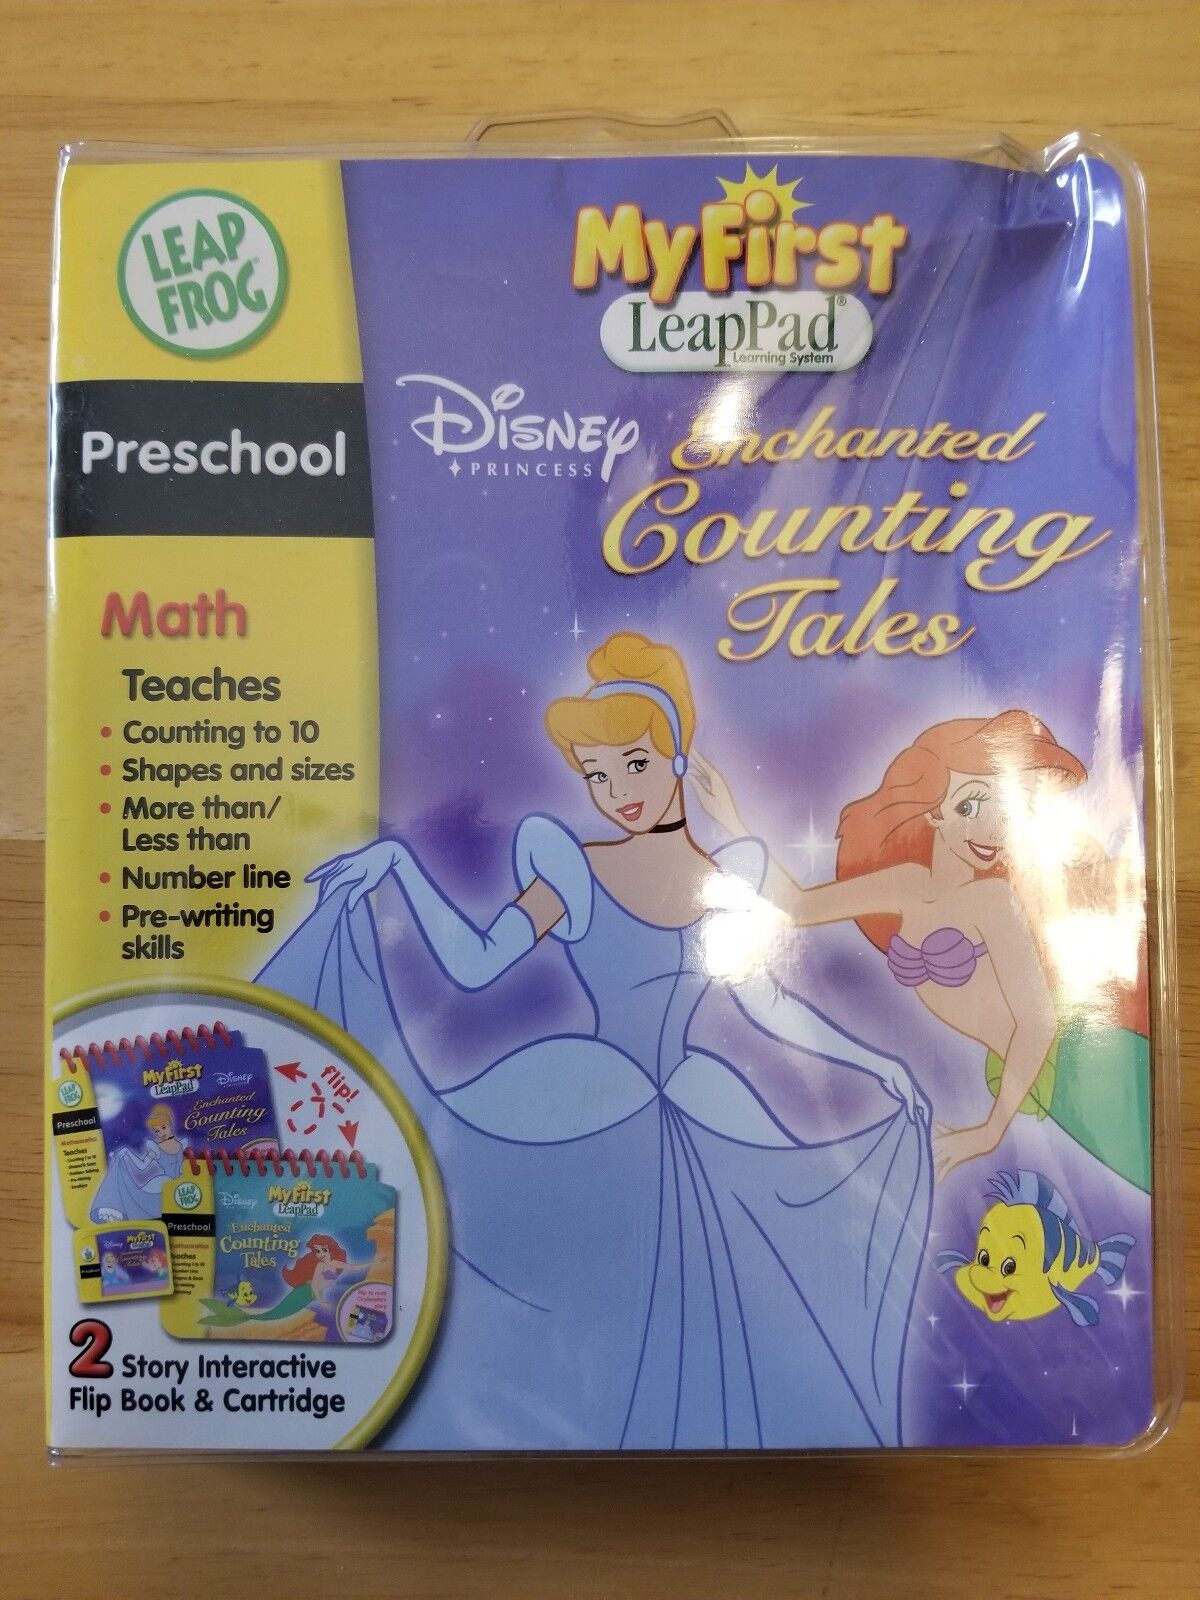 My First LeapPad: Enchanted Counting Tales (Disney Princess)